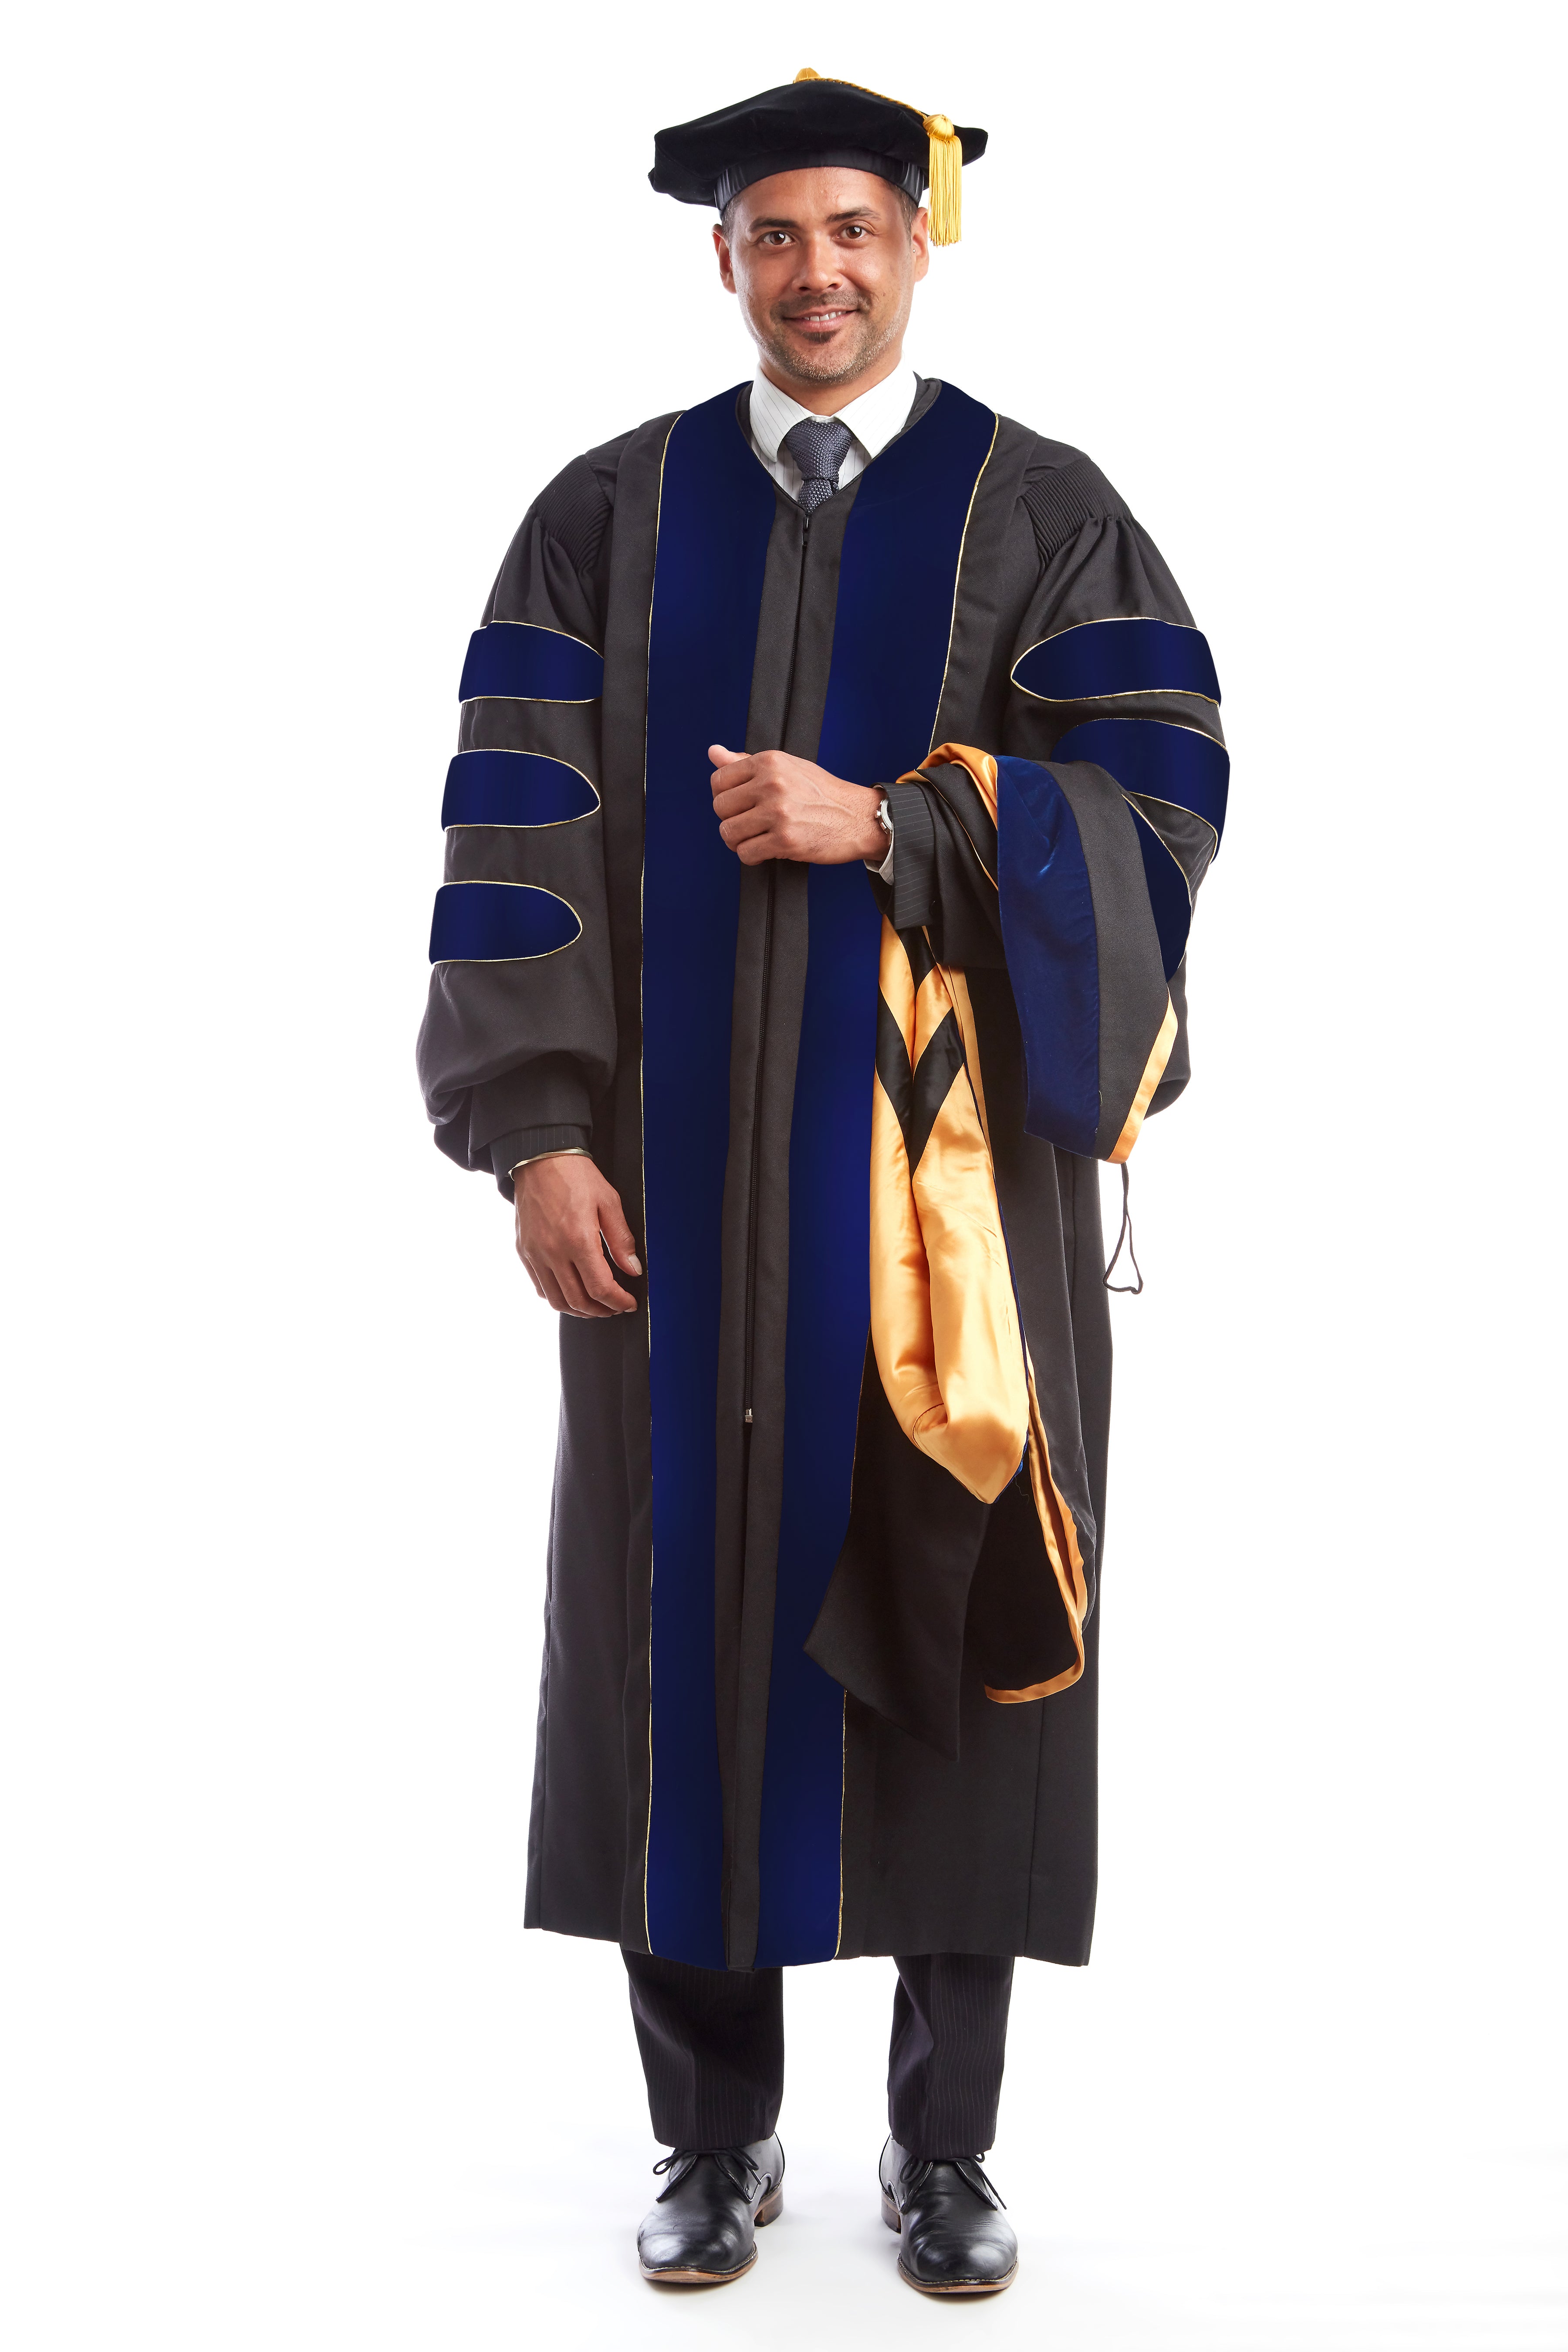 Doctoral graduation gown for Cardiff University – Churchill Gowns